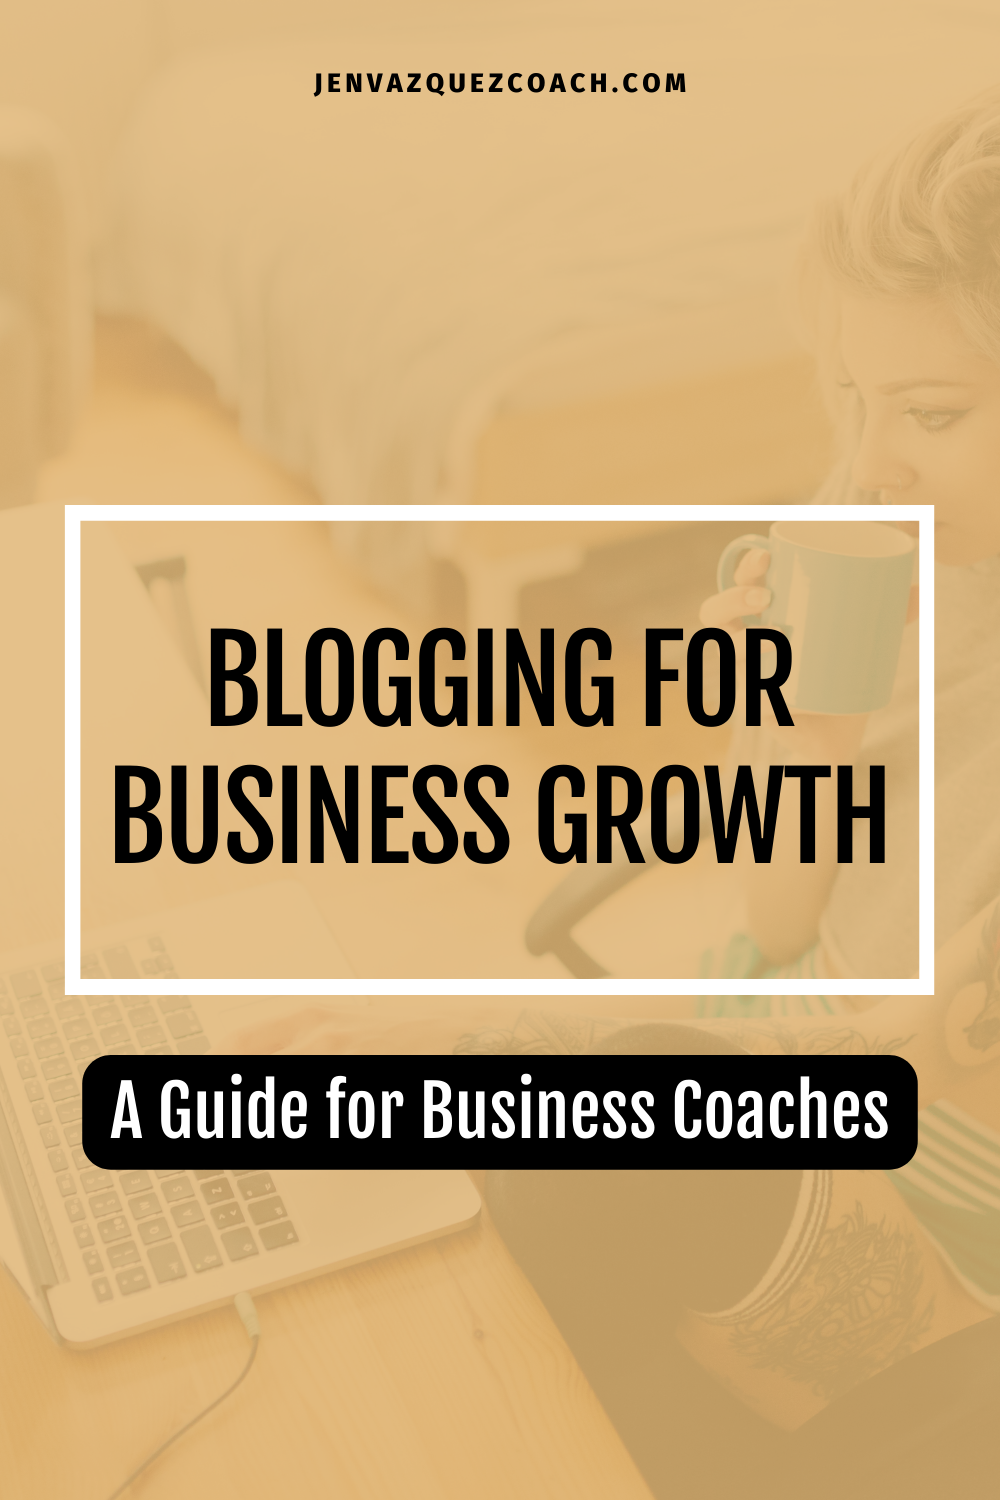 Blogging for Business Growth  A Guide for Business Coaches pins blog